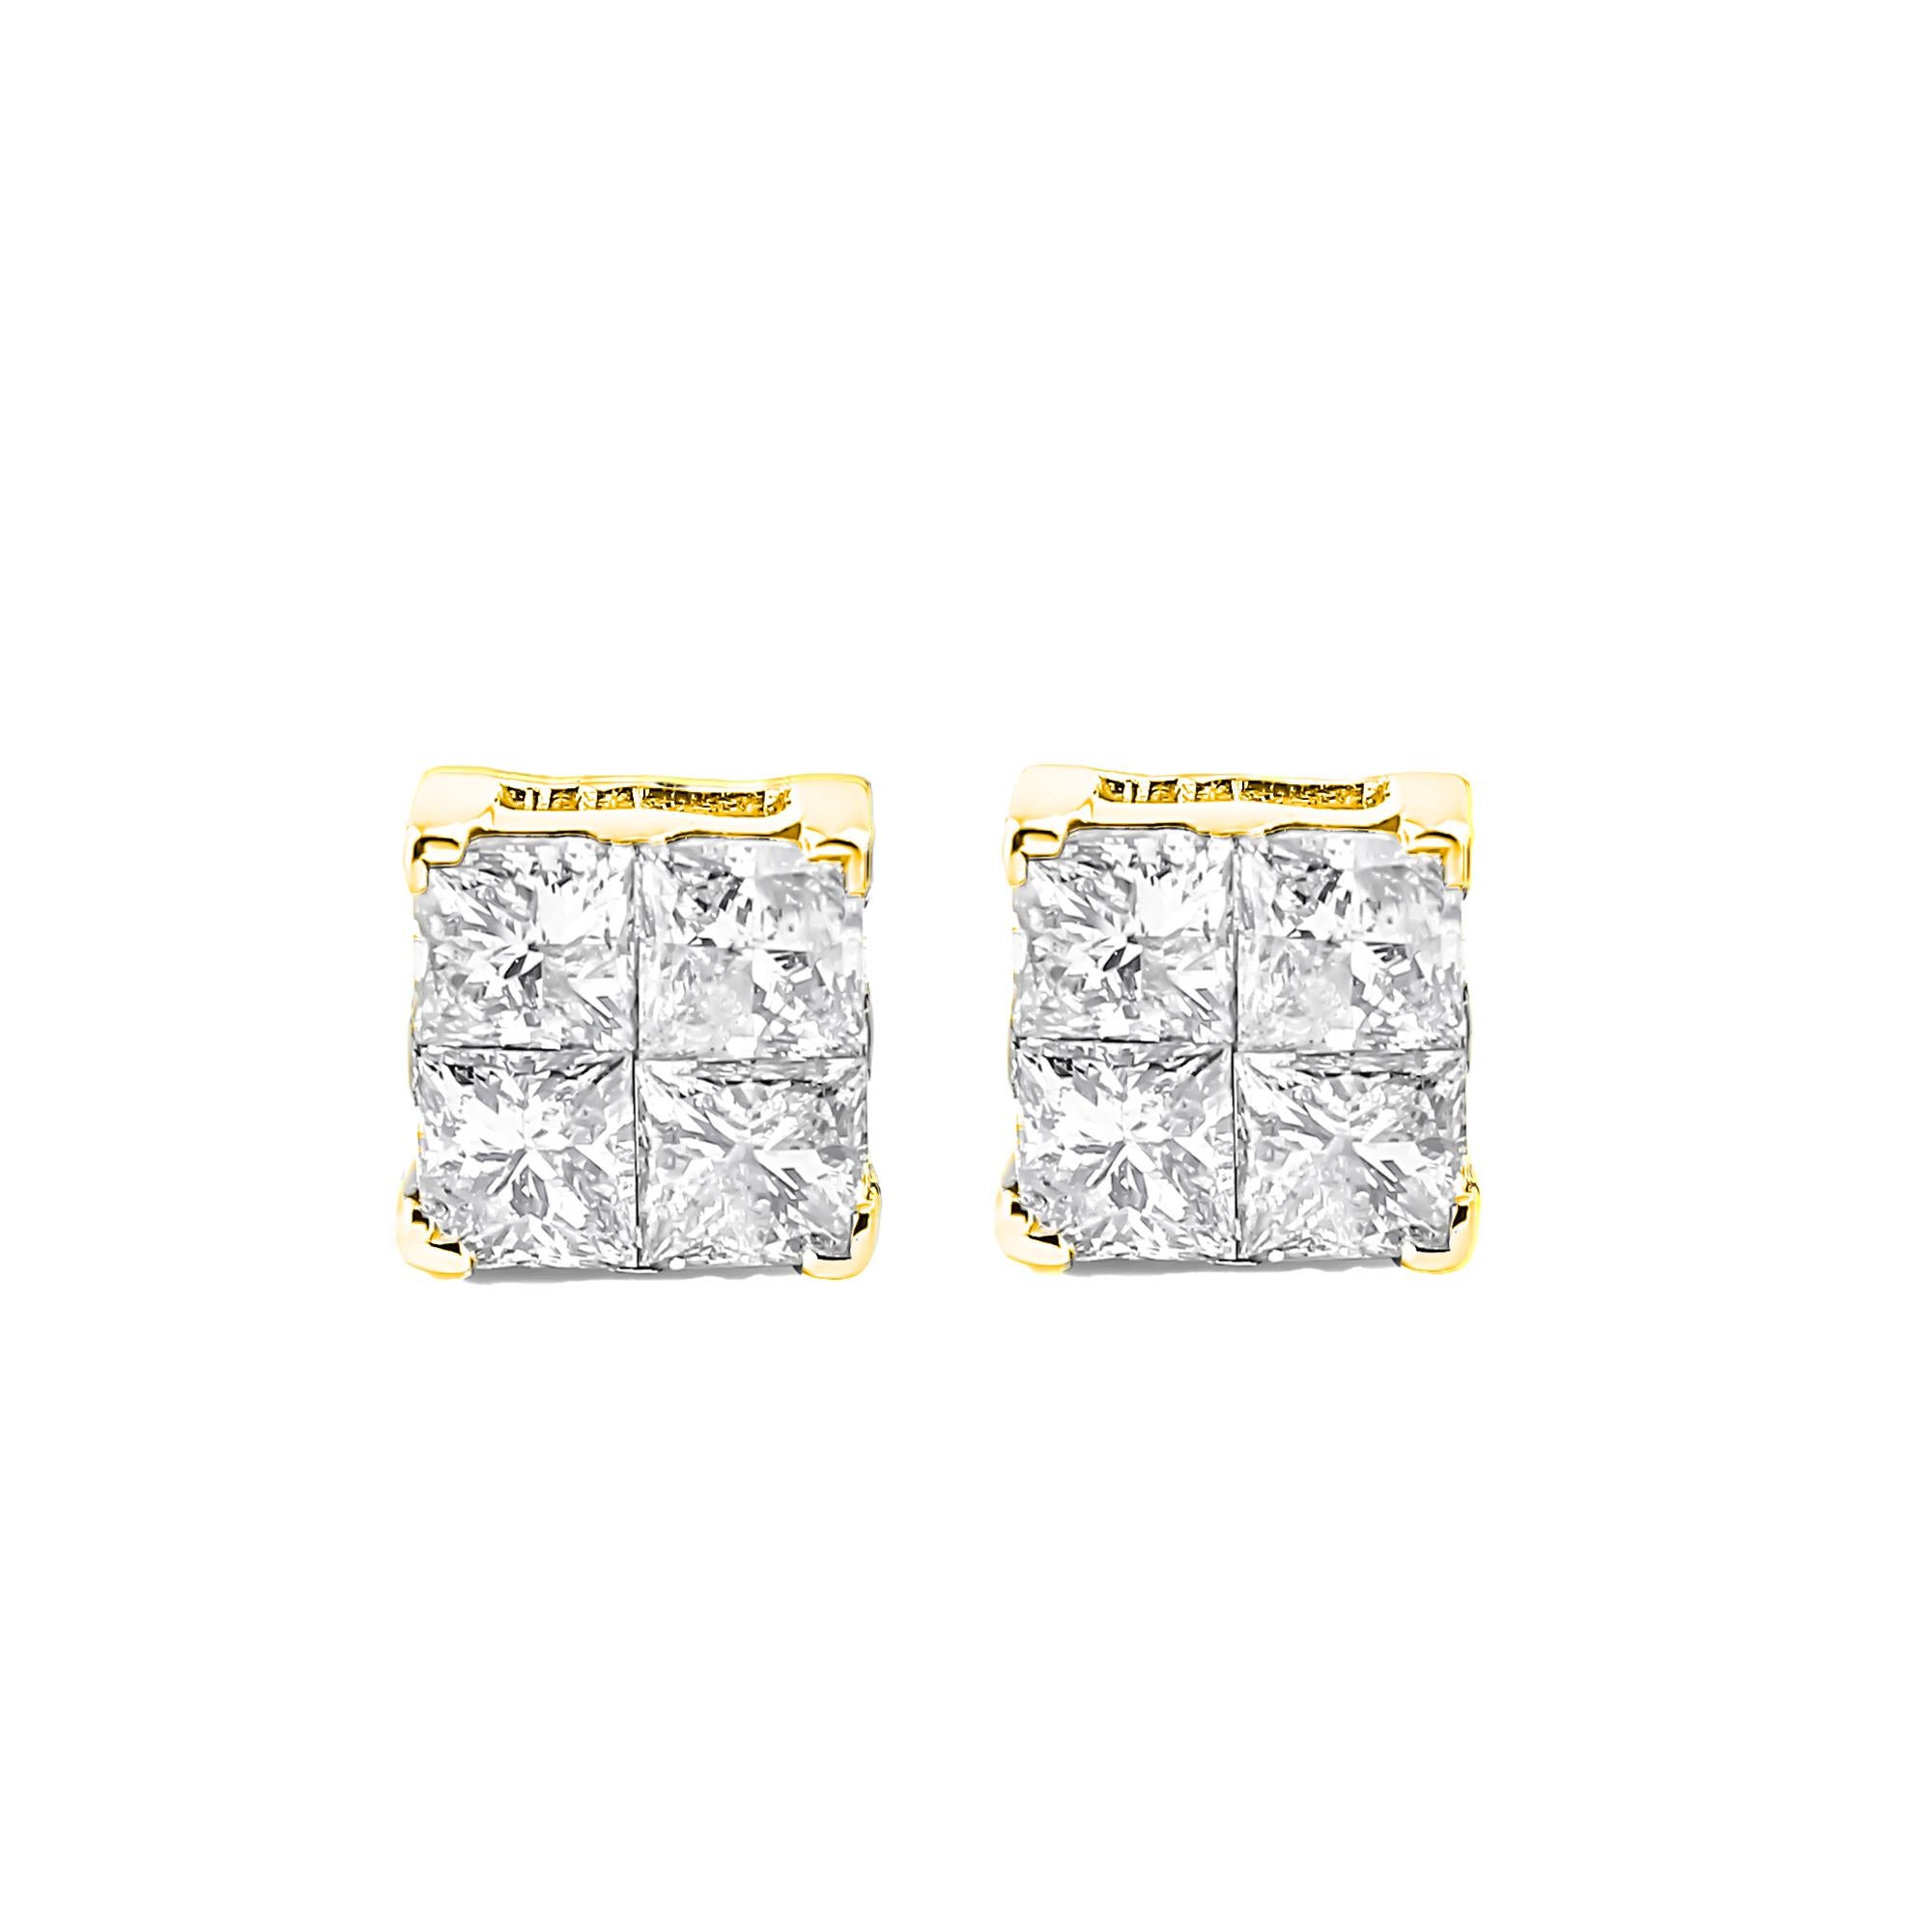 These classic and beautiful stud earrings feature 1ct TDW of stunning, natural princess-cut diamonds. Four princess-cut diamonds in an invisible setting create a larger stone that captures the light in a unique way. These earrings are created in 10k